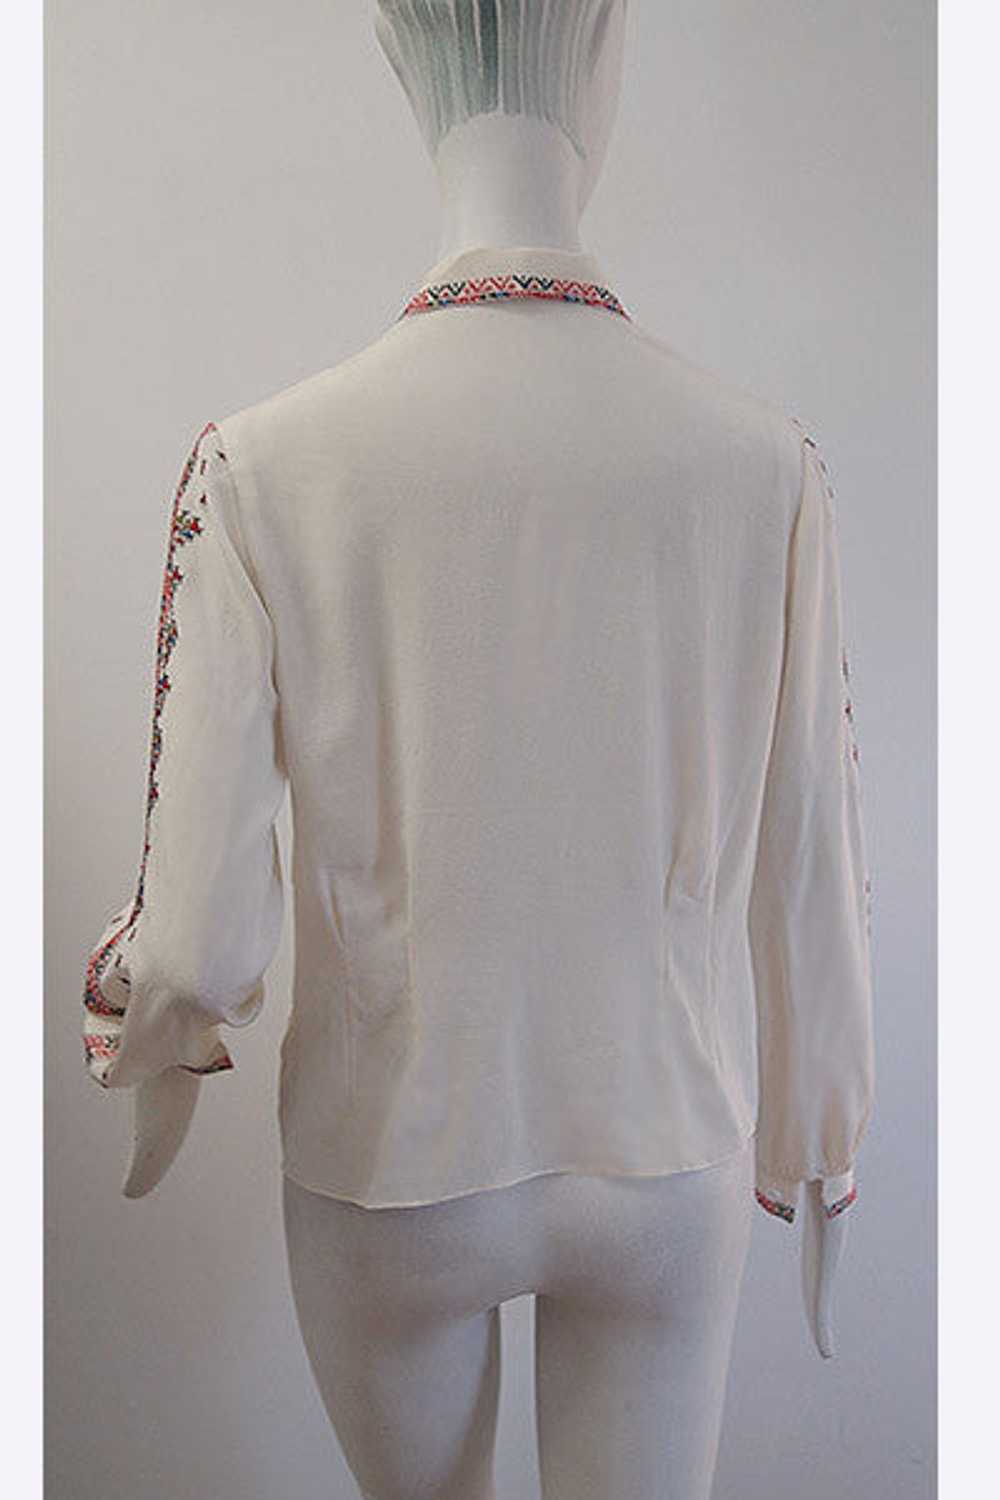 1950s Romanian Embroidered Peasant Blouse - image 3